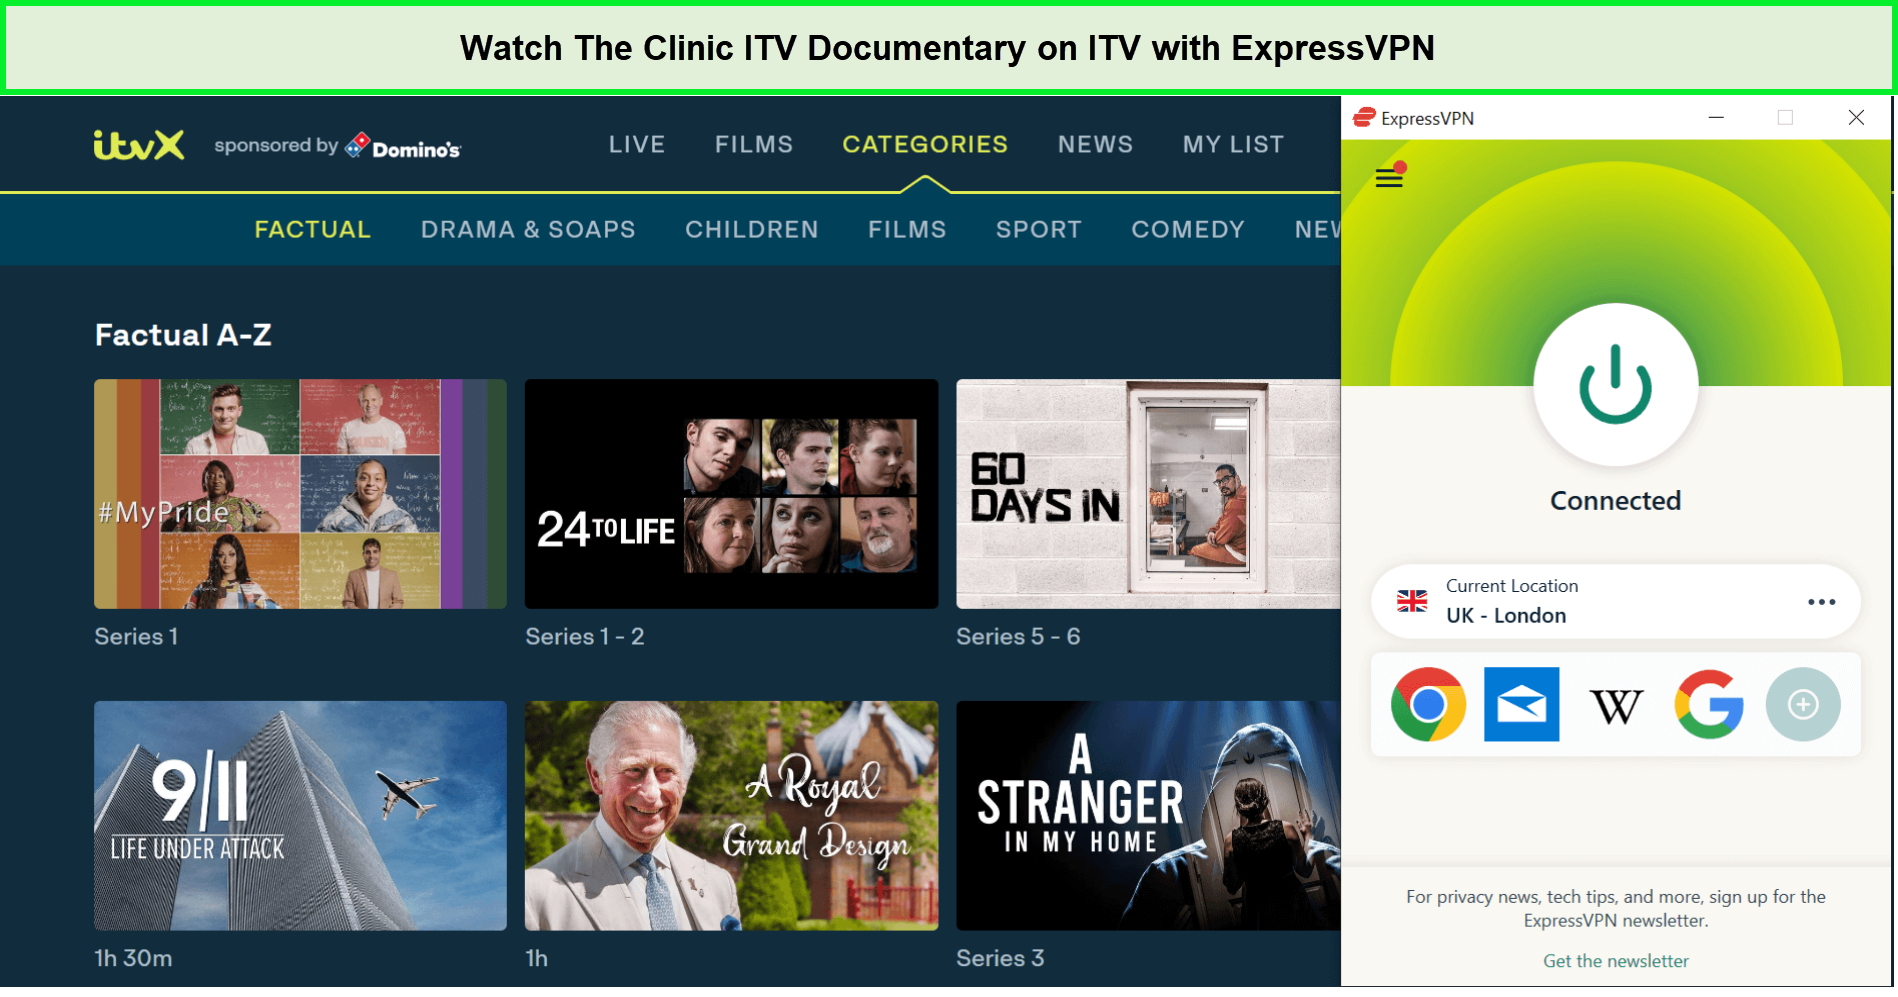 Watch-The-Clinic-ITV-Documentary-in-Australia-on-ITV-with-ExpressVPN.